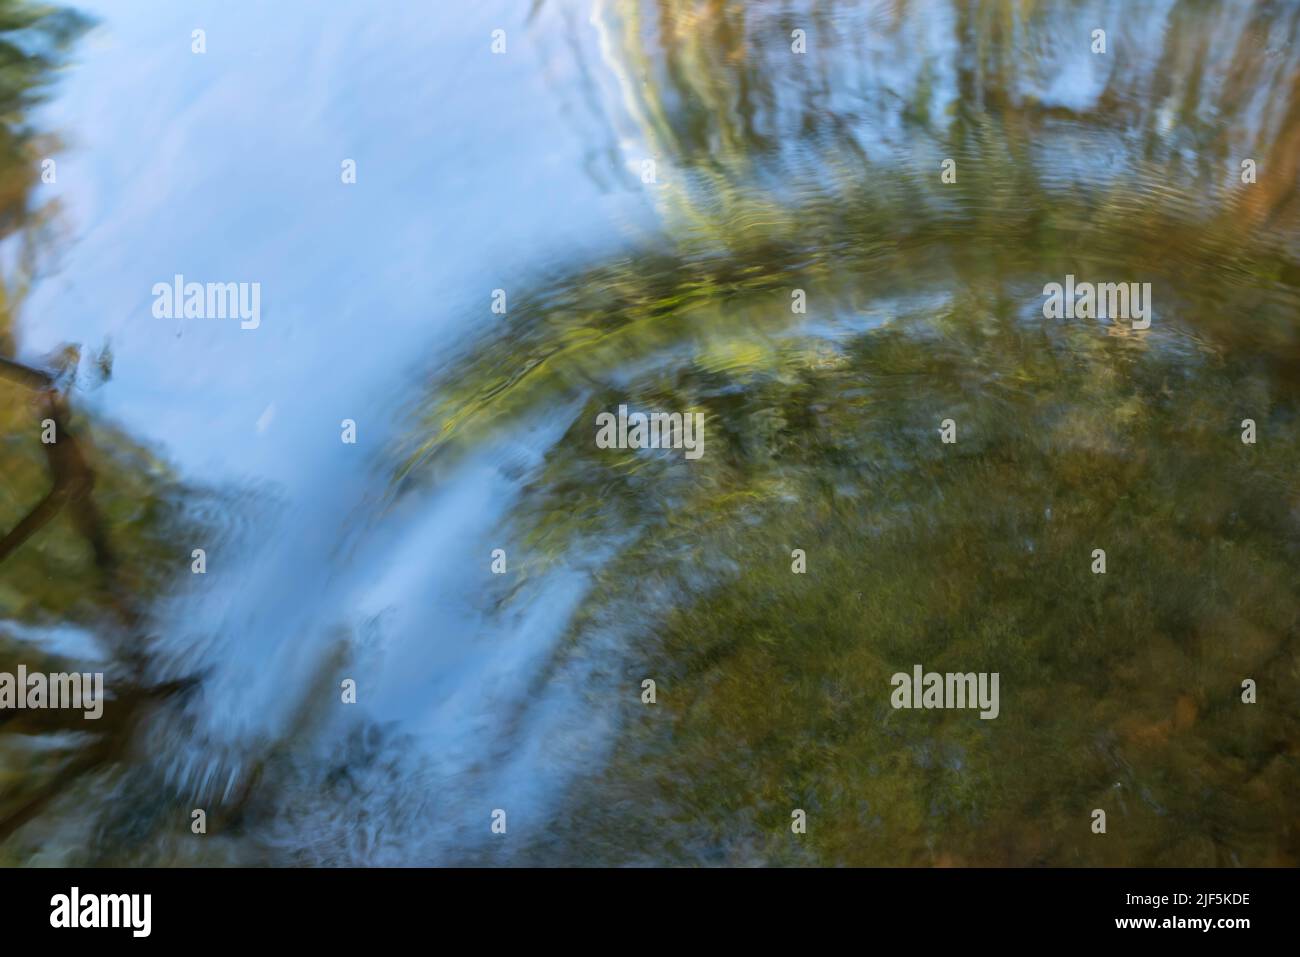 Abstract ripples wash through serene forest pond reflection. Stock Photo